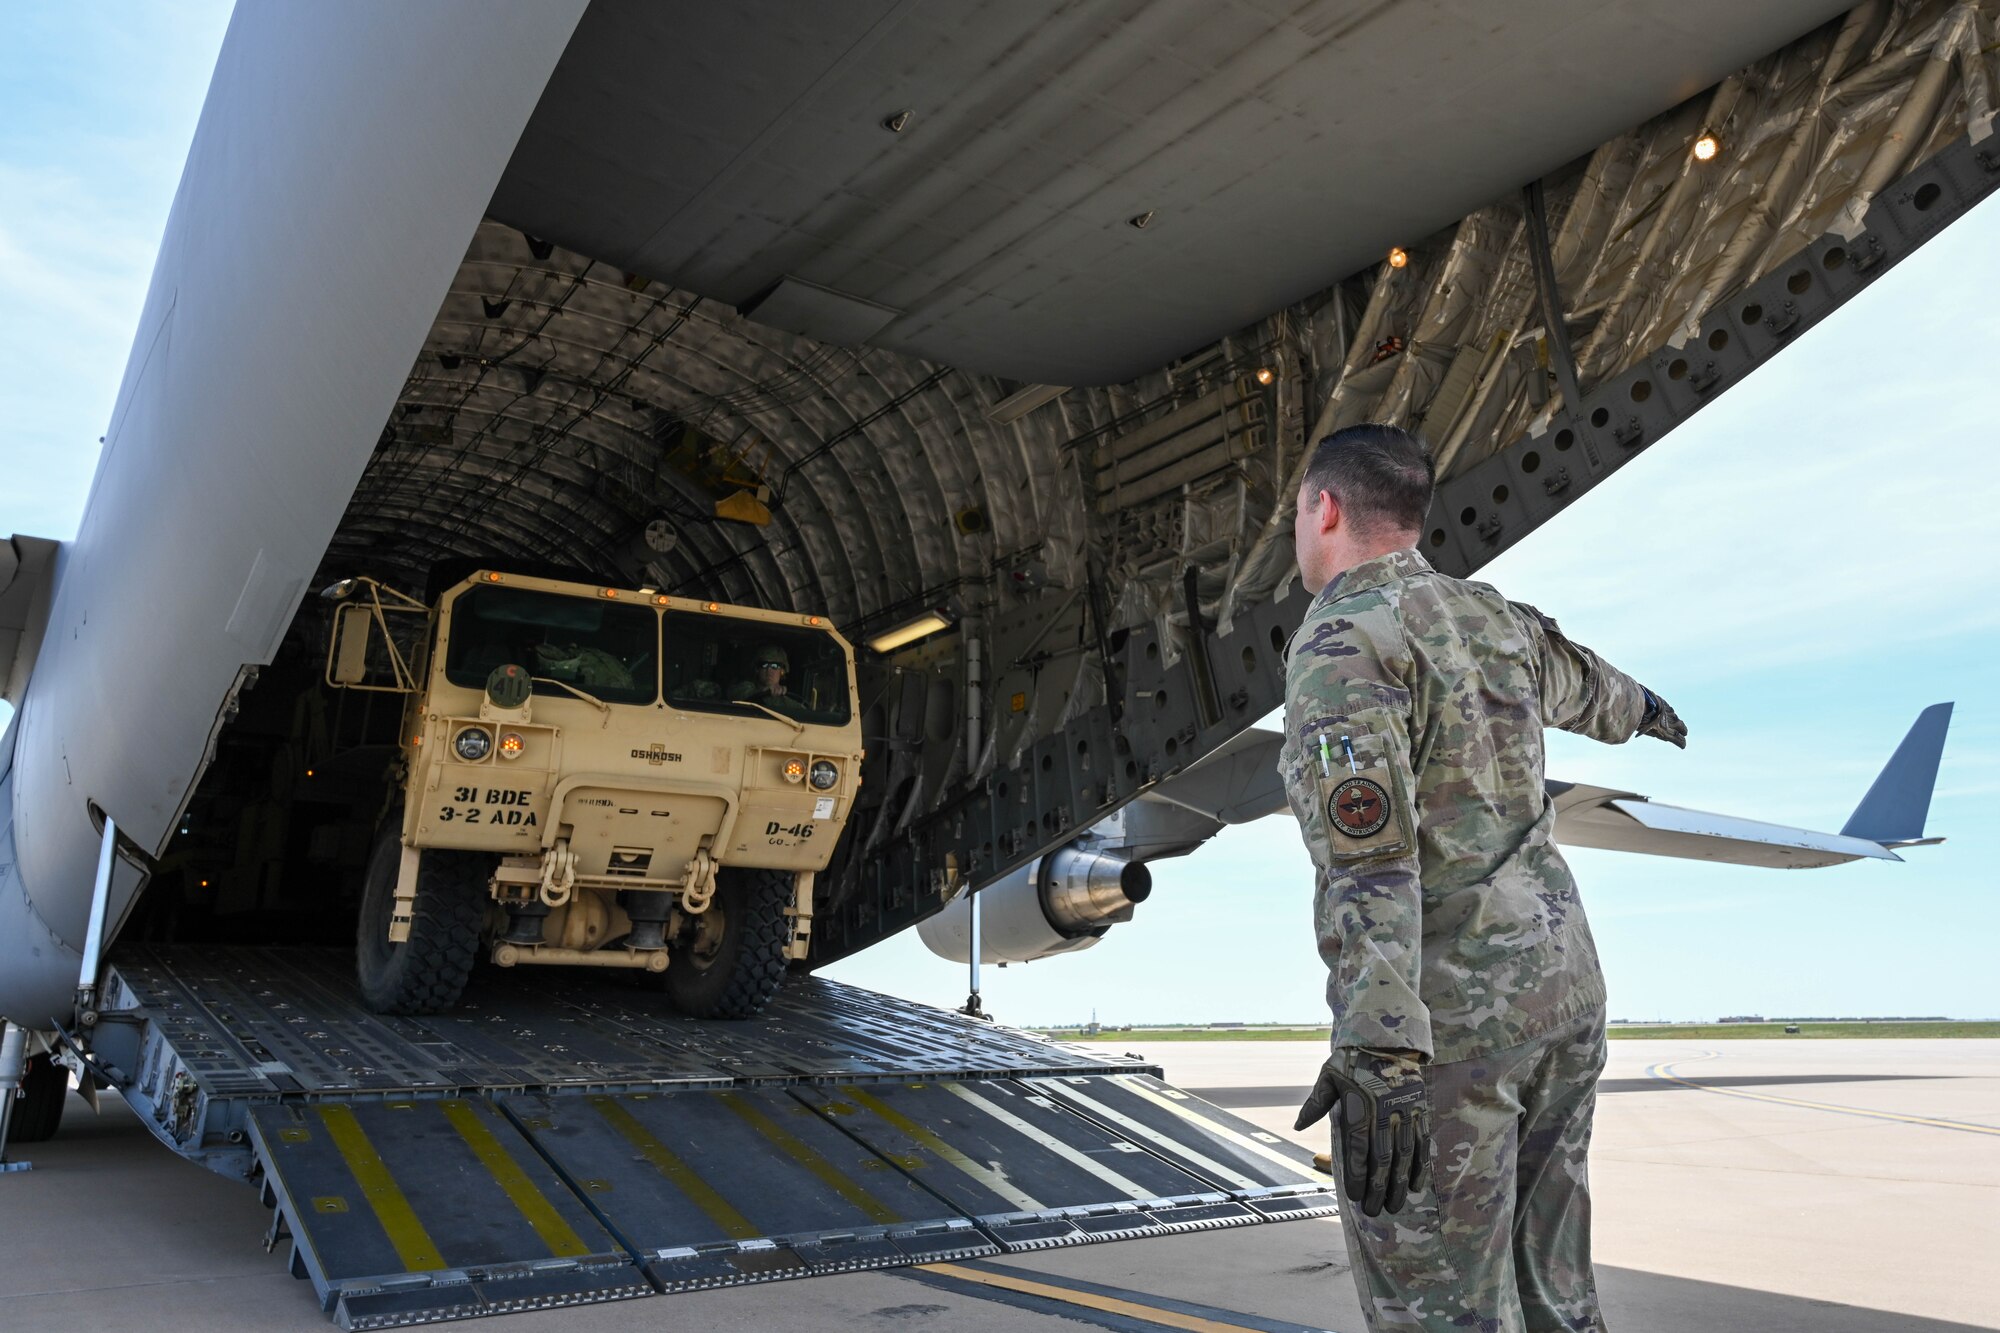 U.S. Air Force Master Sgt. Jeremy John, 58th Airlift Squadron training flight superintendent, helps guide a mobile Patriot missile battery into a C-17 Globemaster III at Altus Air Force Base (AFB), Oklahoma, April 19, 2023. This training was an opportunity for loadmasters and U.S. Airmen from the 97th Logistics Readiness Squadron to get hands-on experience with equipment they don’t see during their normal operations at Altus AFB. (U.S. Air Force photo by Senior Airman Trenton Jancze)